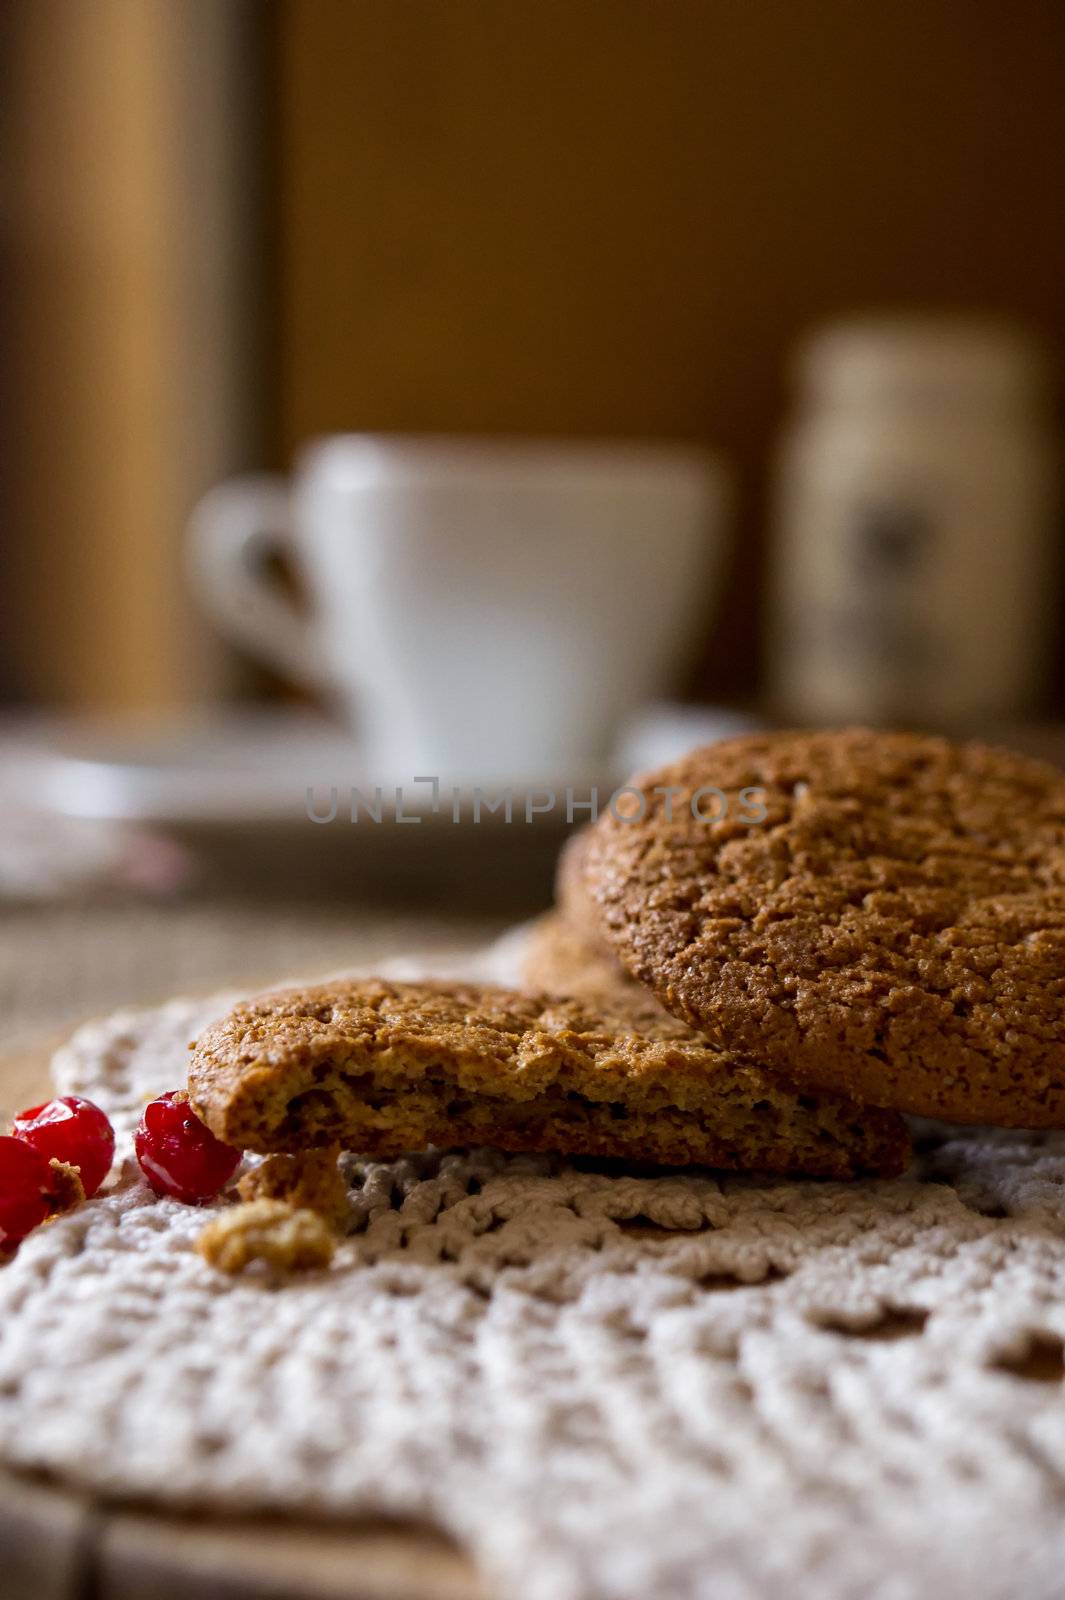 Crumpled tasty oatmeal cookies with cranberries on knitting cloth. Shallow DOF